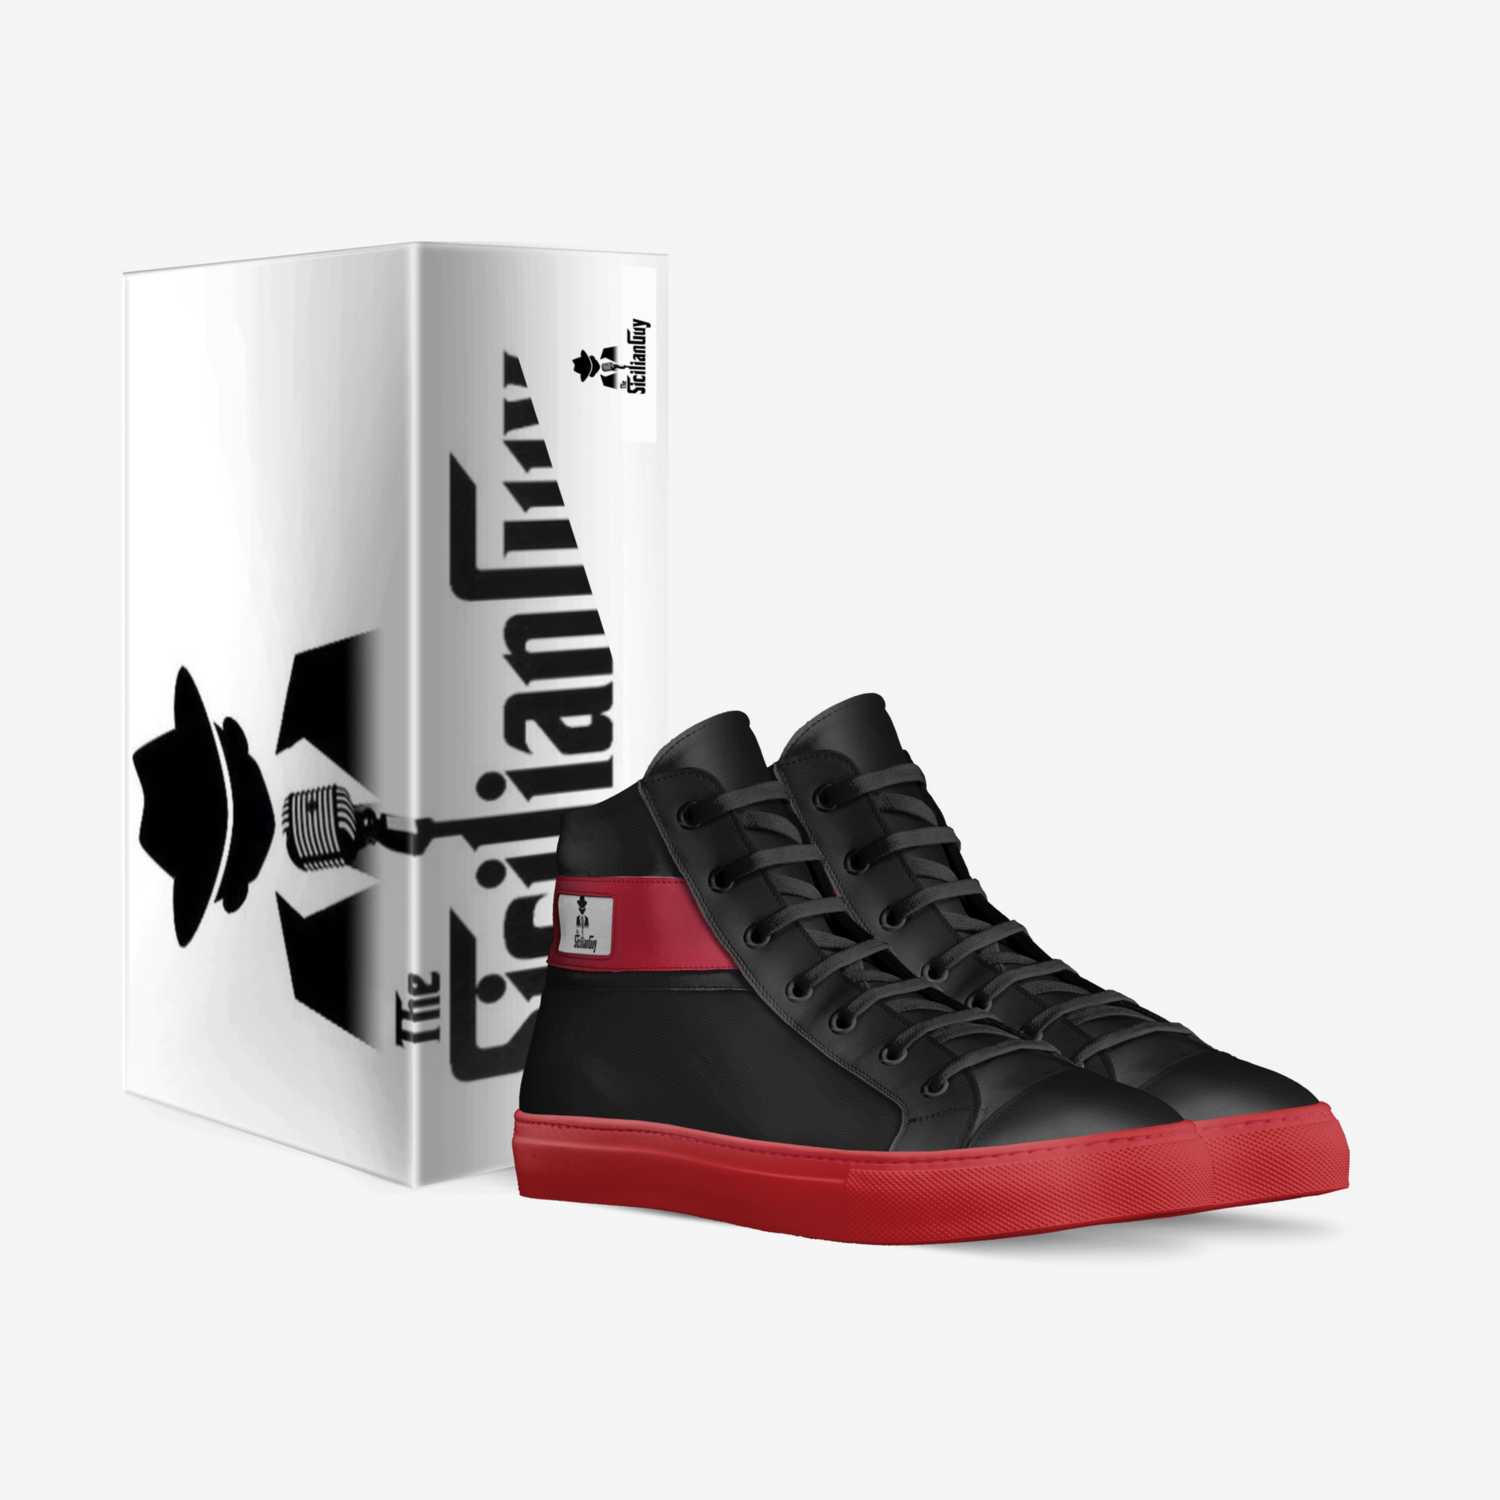 Al Tee custom made in Italy shoes by Alessio Terrana | Box view